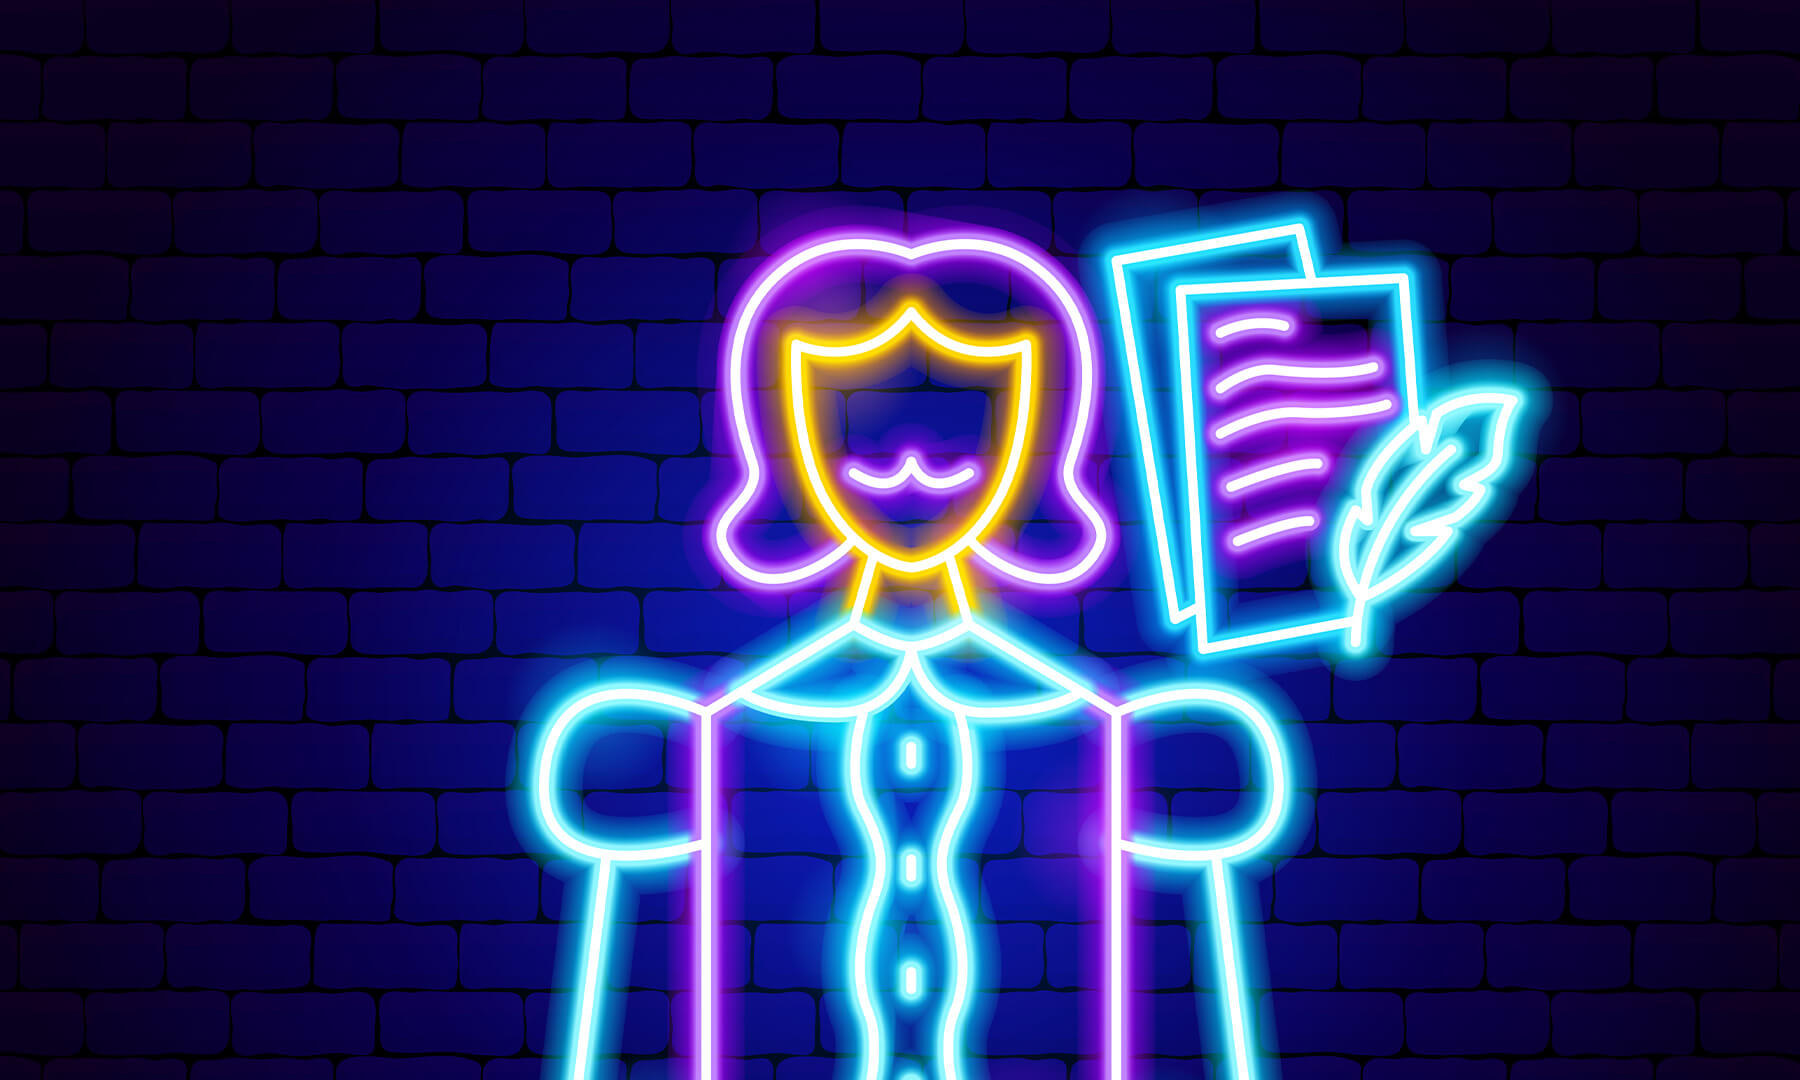 Neon artist's drawing of William Shakespeare